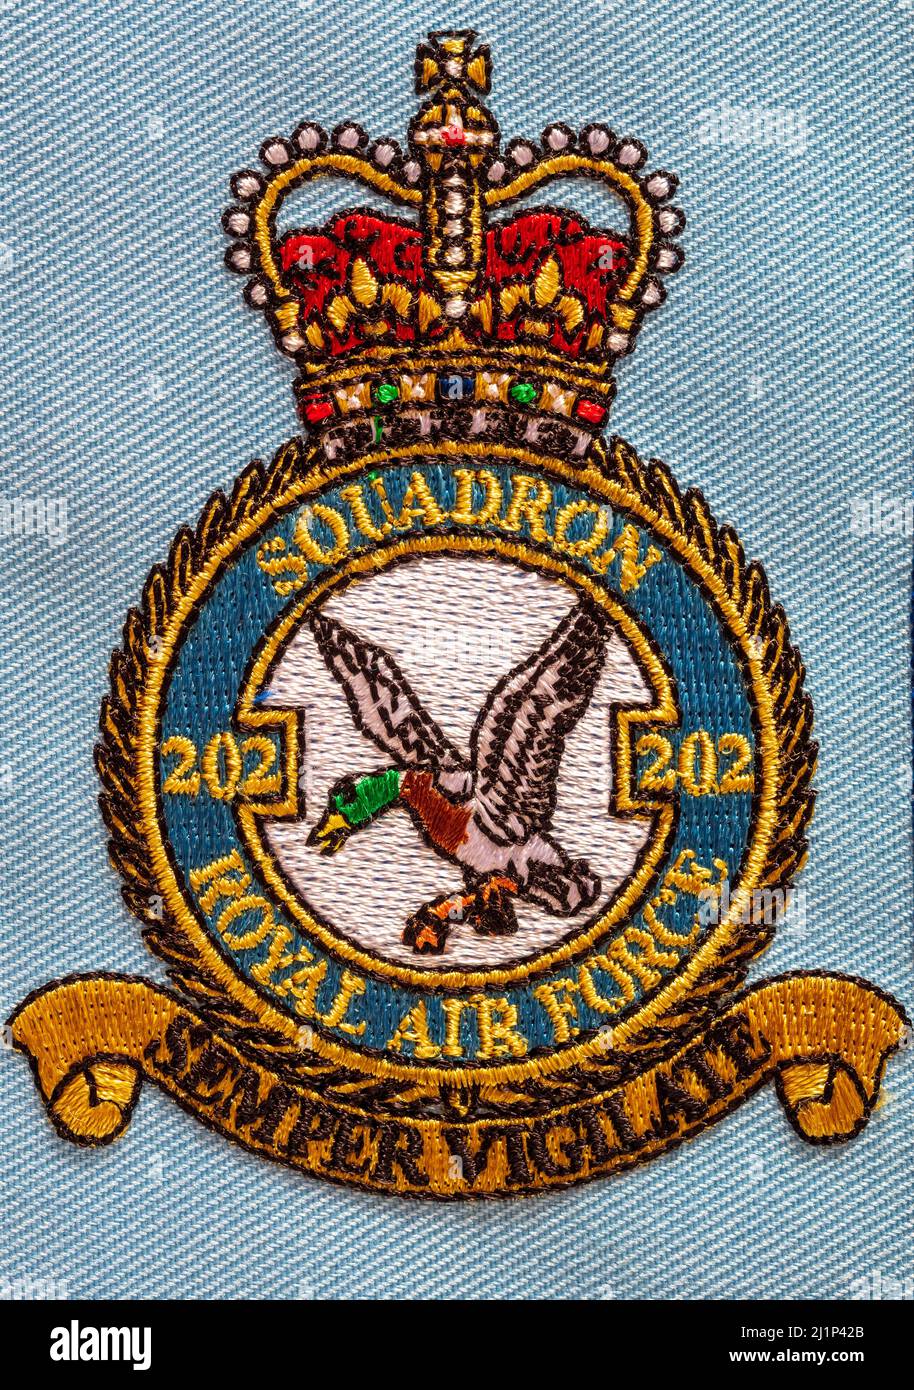 ROYAL AIR FORCE BOULMER SEARCH & RESCUE PATCH. 